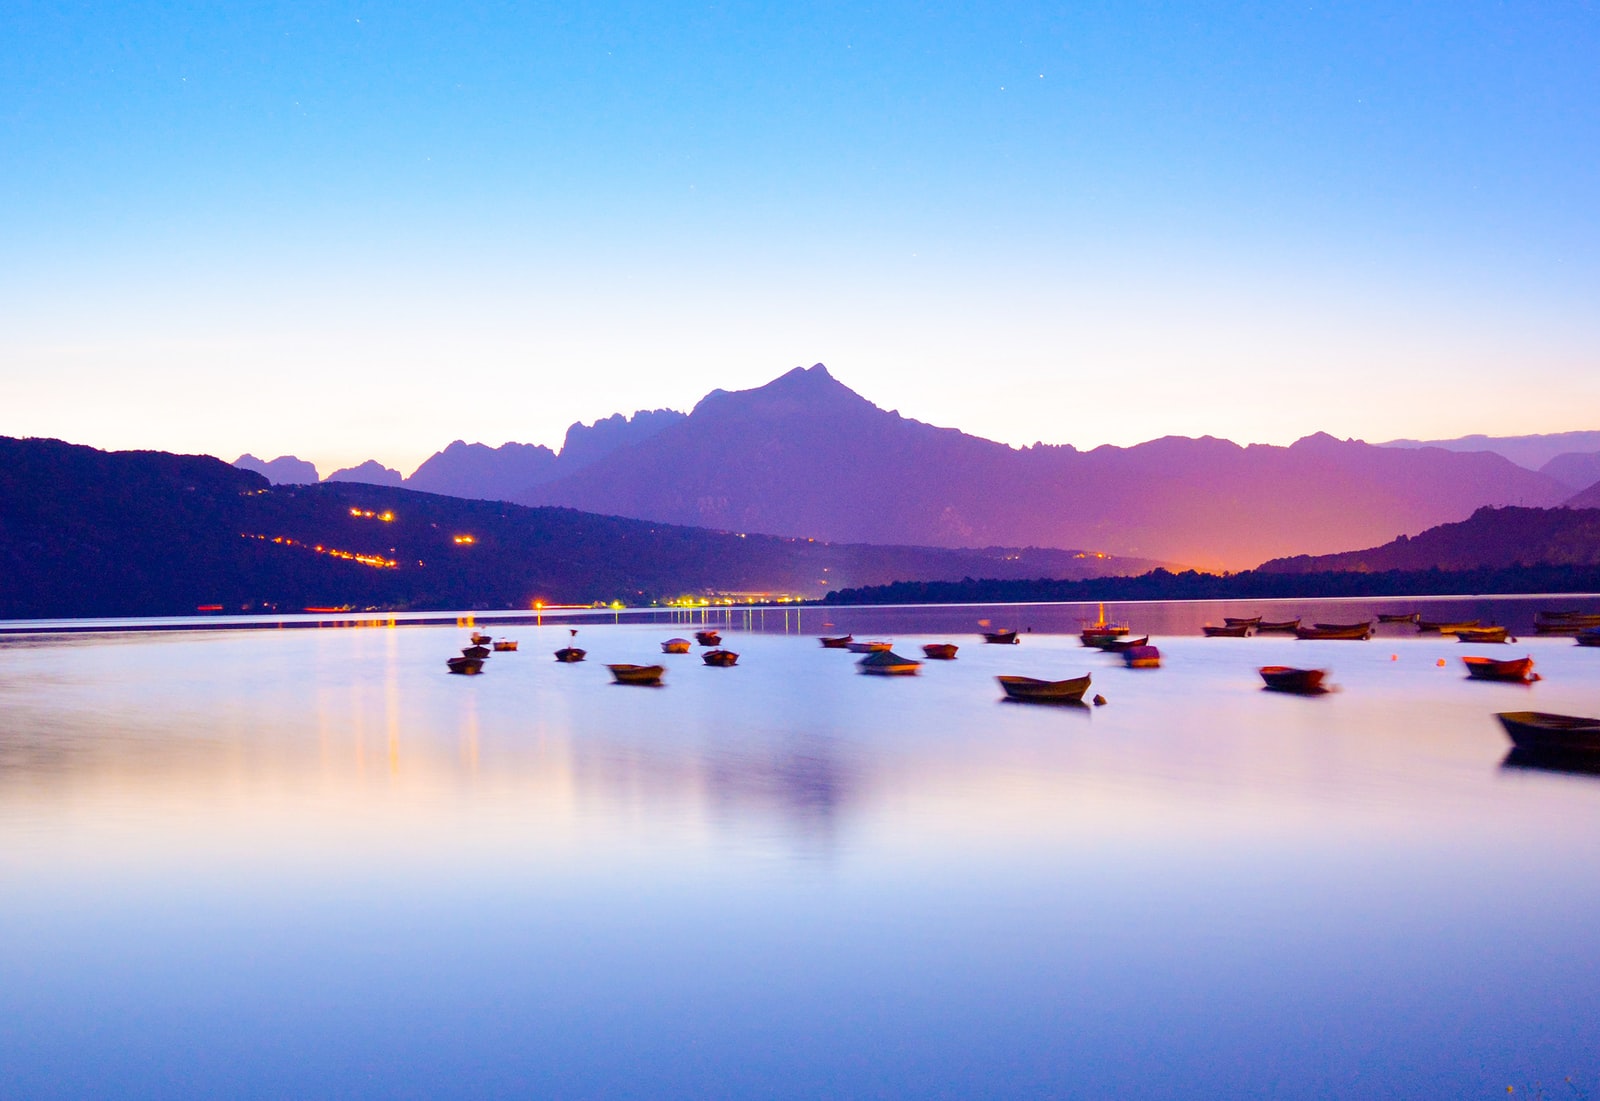 boats in body of calm water overlooking mountain and city lights